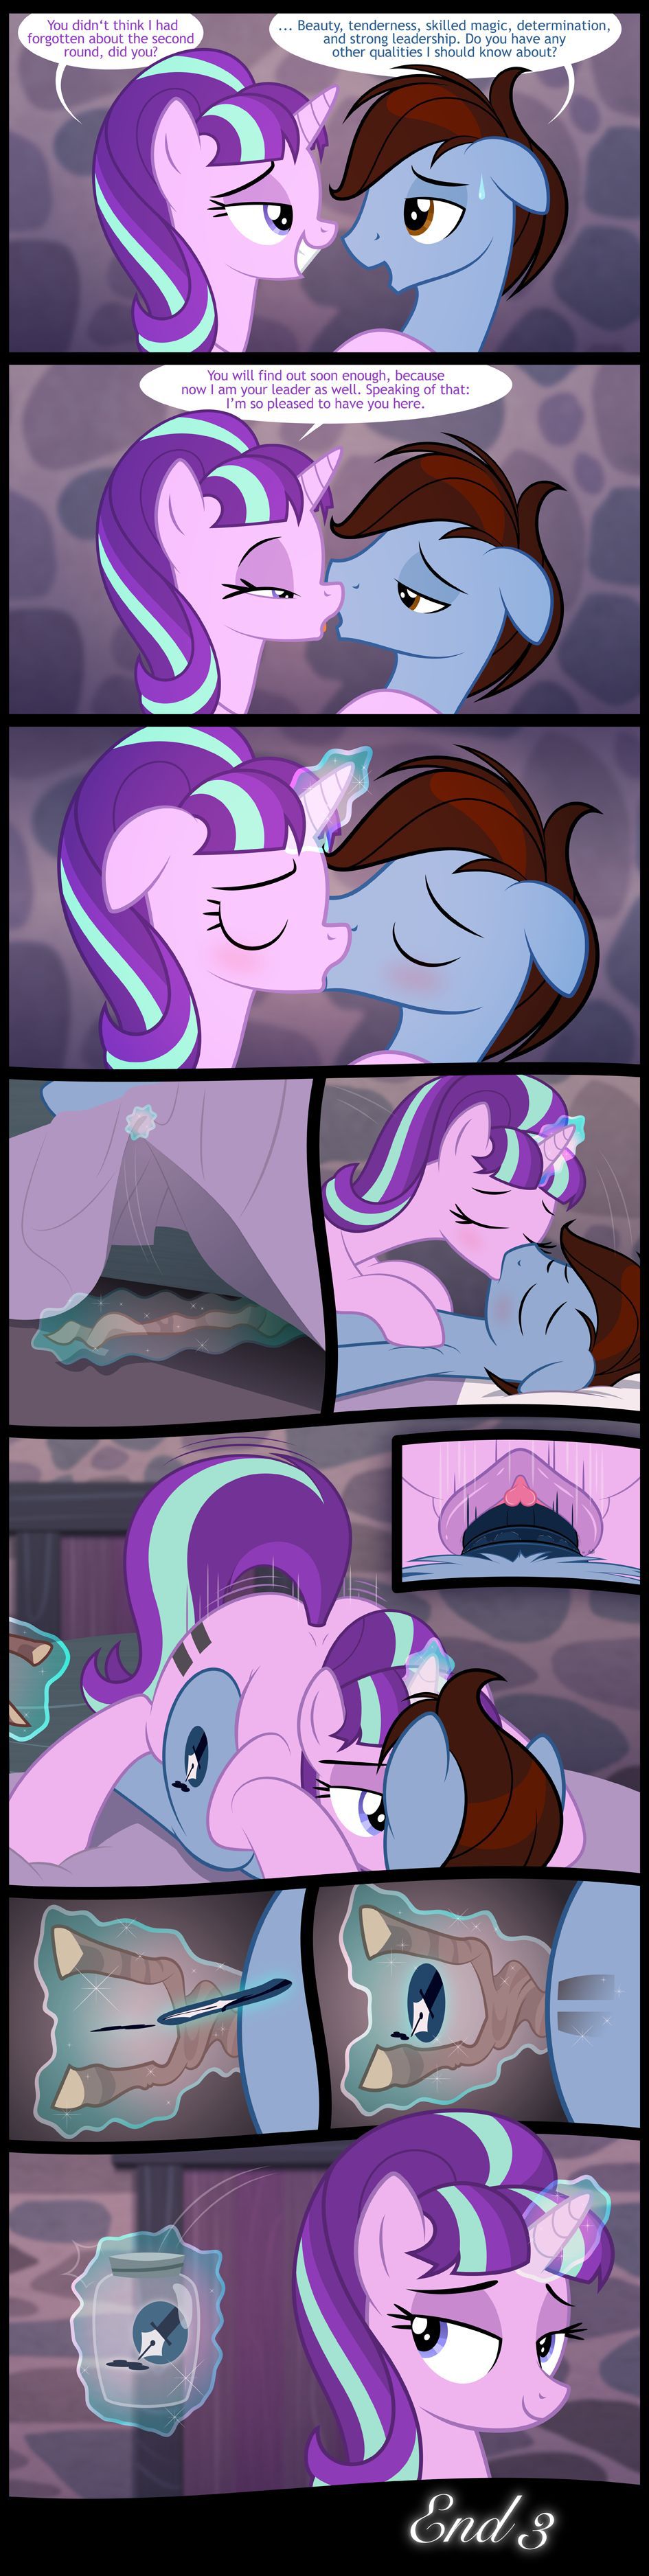 [Culu-Bluebeaver] The Newcomer (My Little Pony: Friendship is Magic) 20